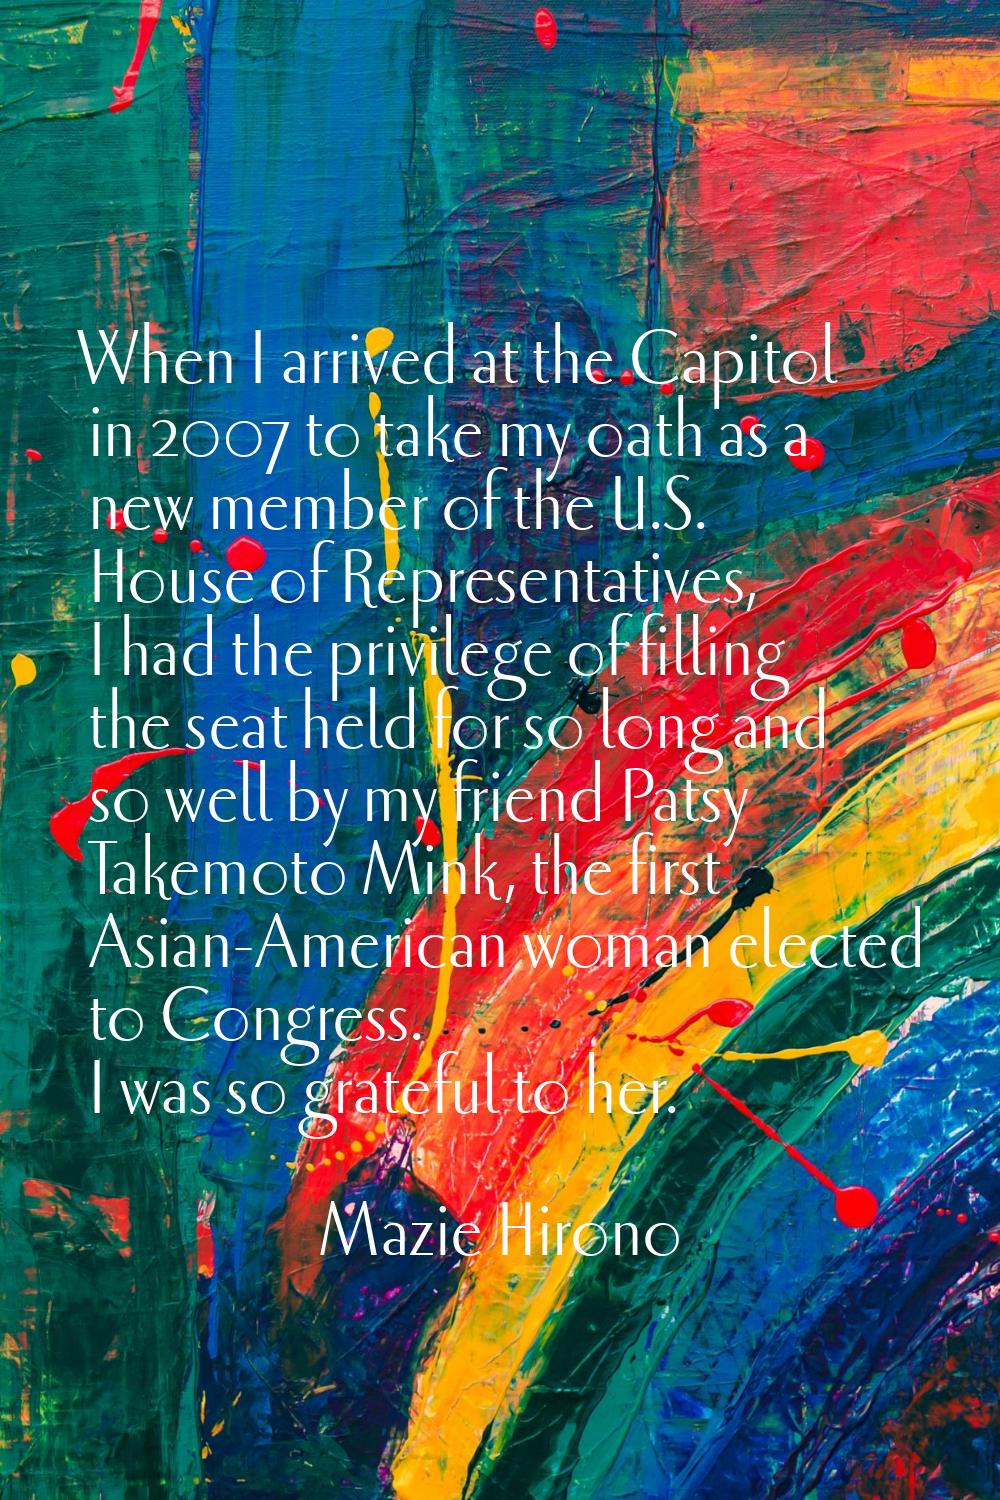 When I arrived at the Capitol in 2007 to take my oath as a new member of the U.S. House of Represen